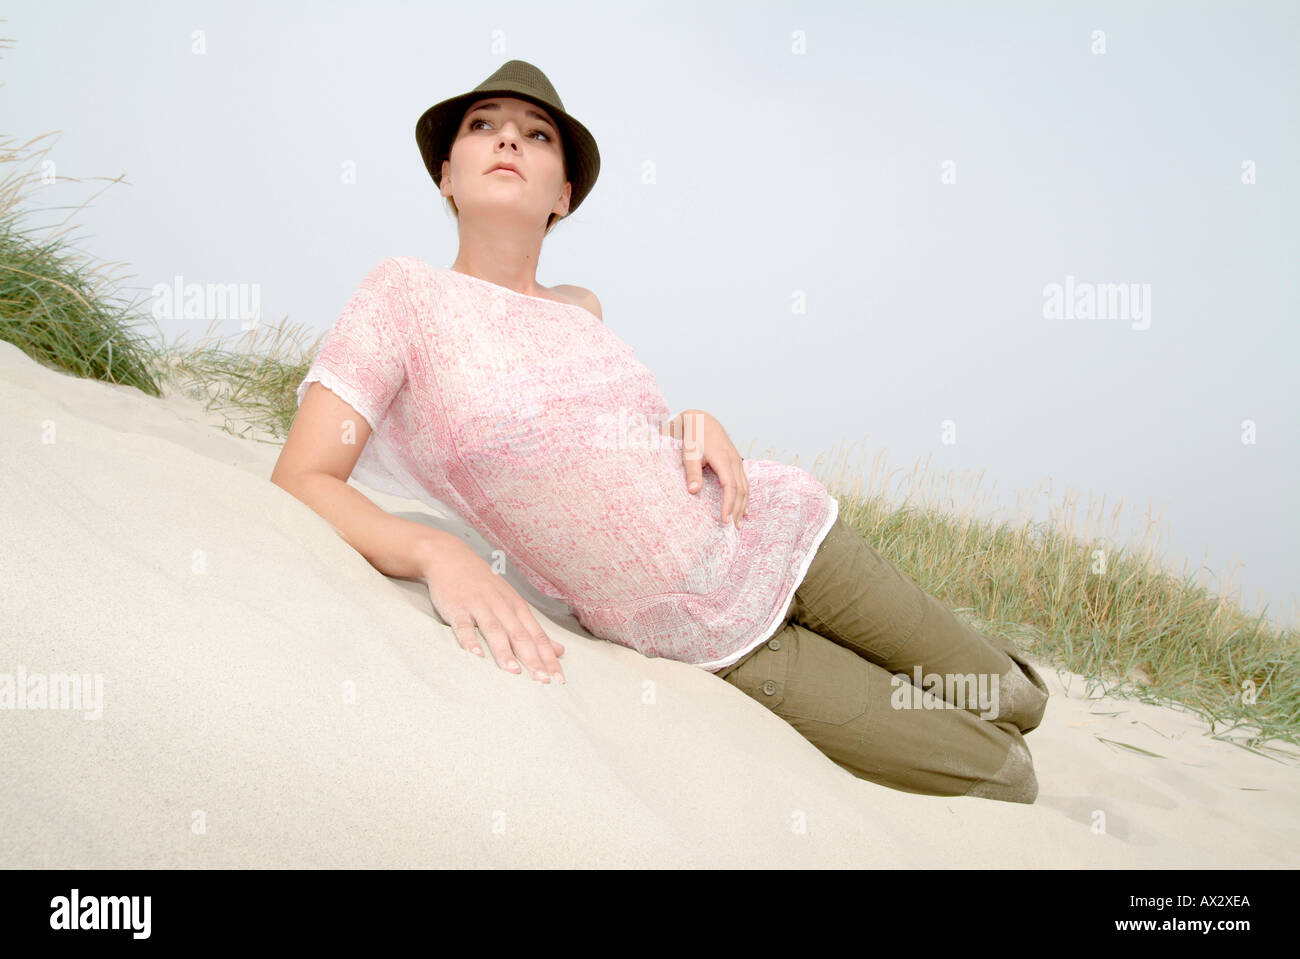 young girl coast grass sands beach sky hot Sommer Sonne Strand fashion Stock Photo